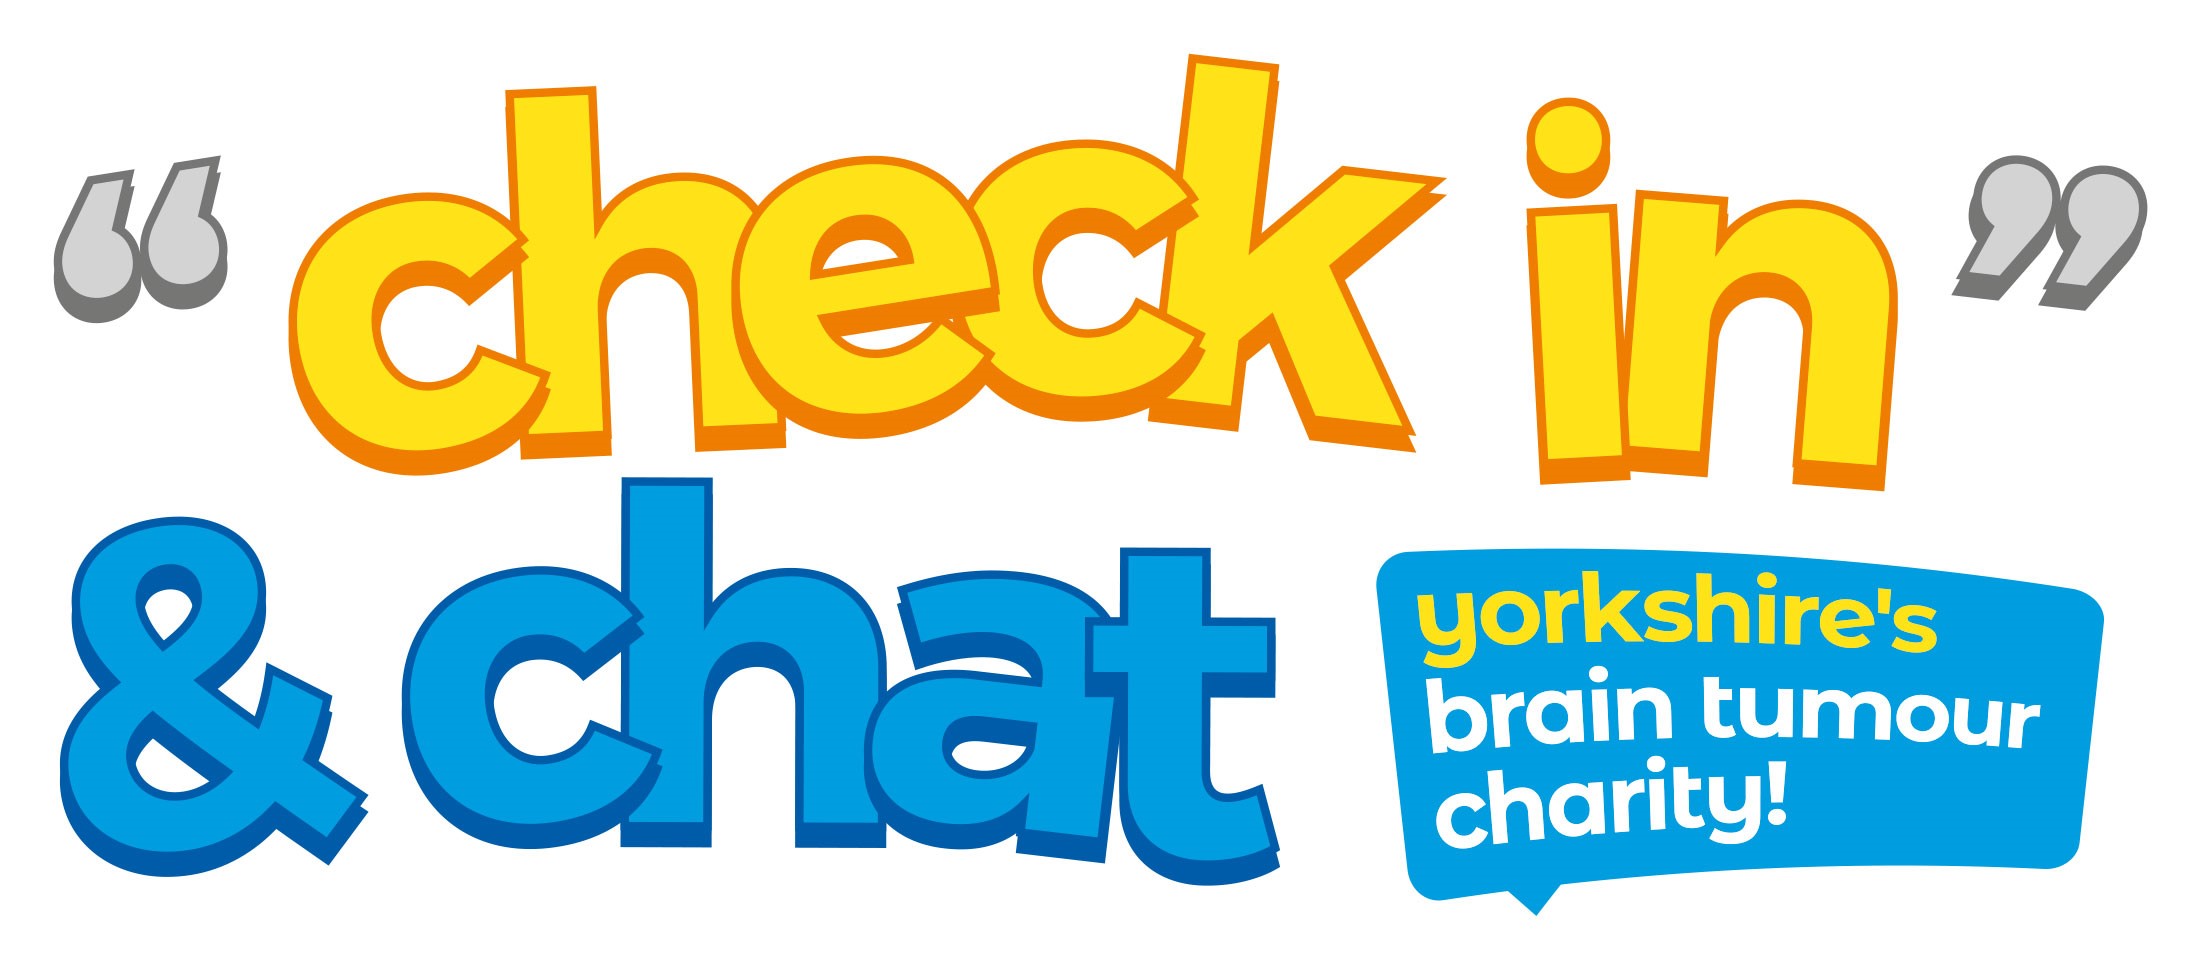 Launching our new peer support scheme "Check In and Chat"